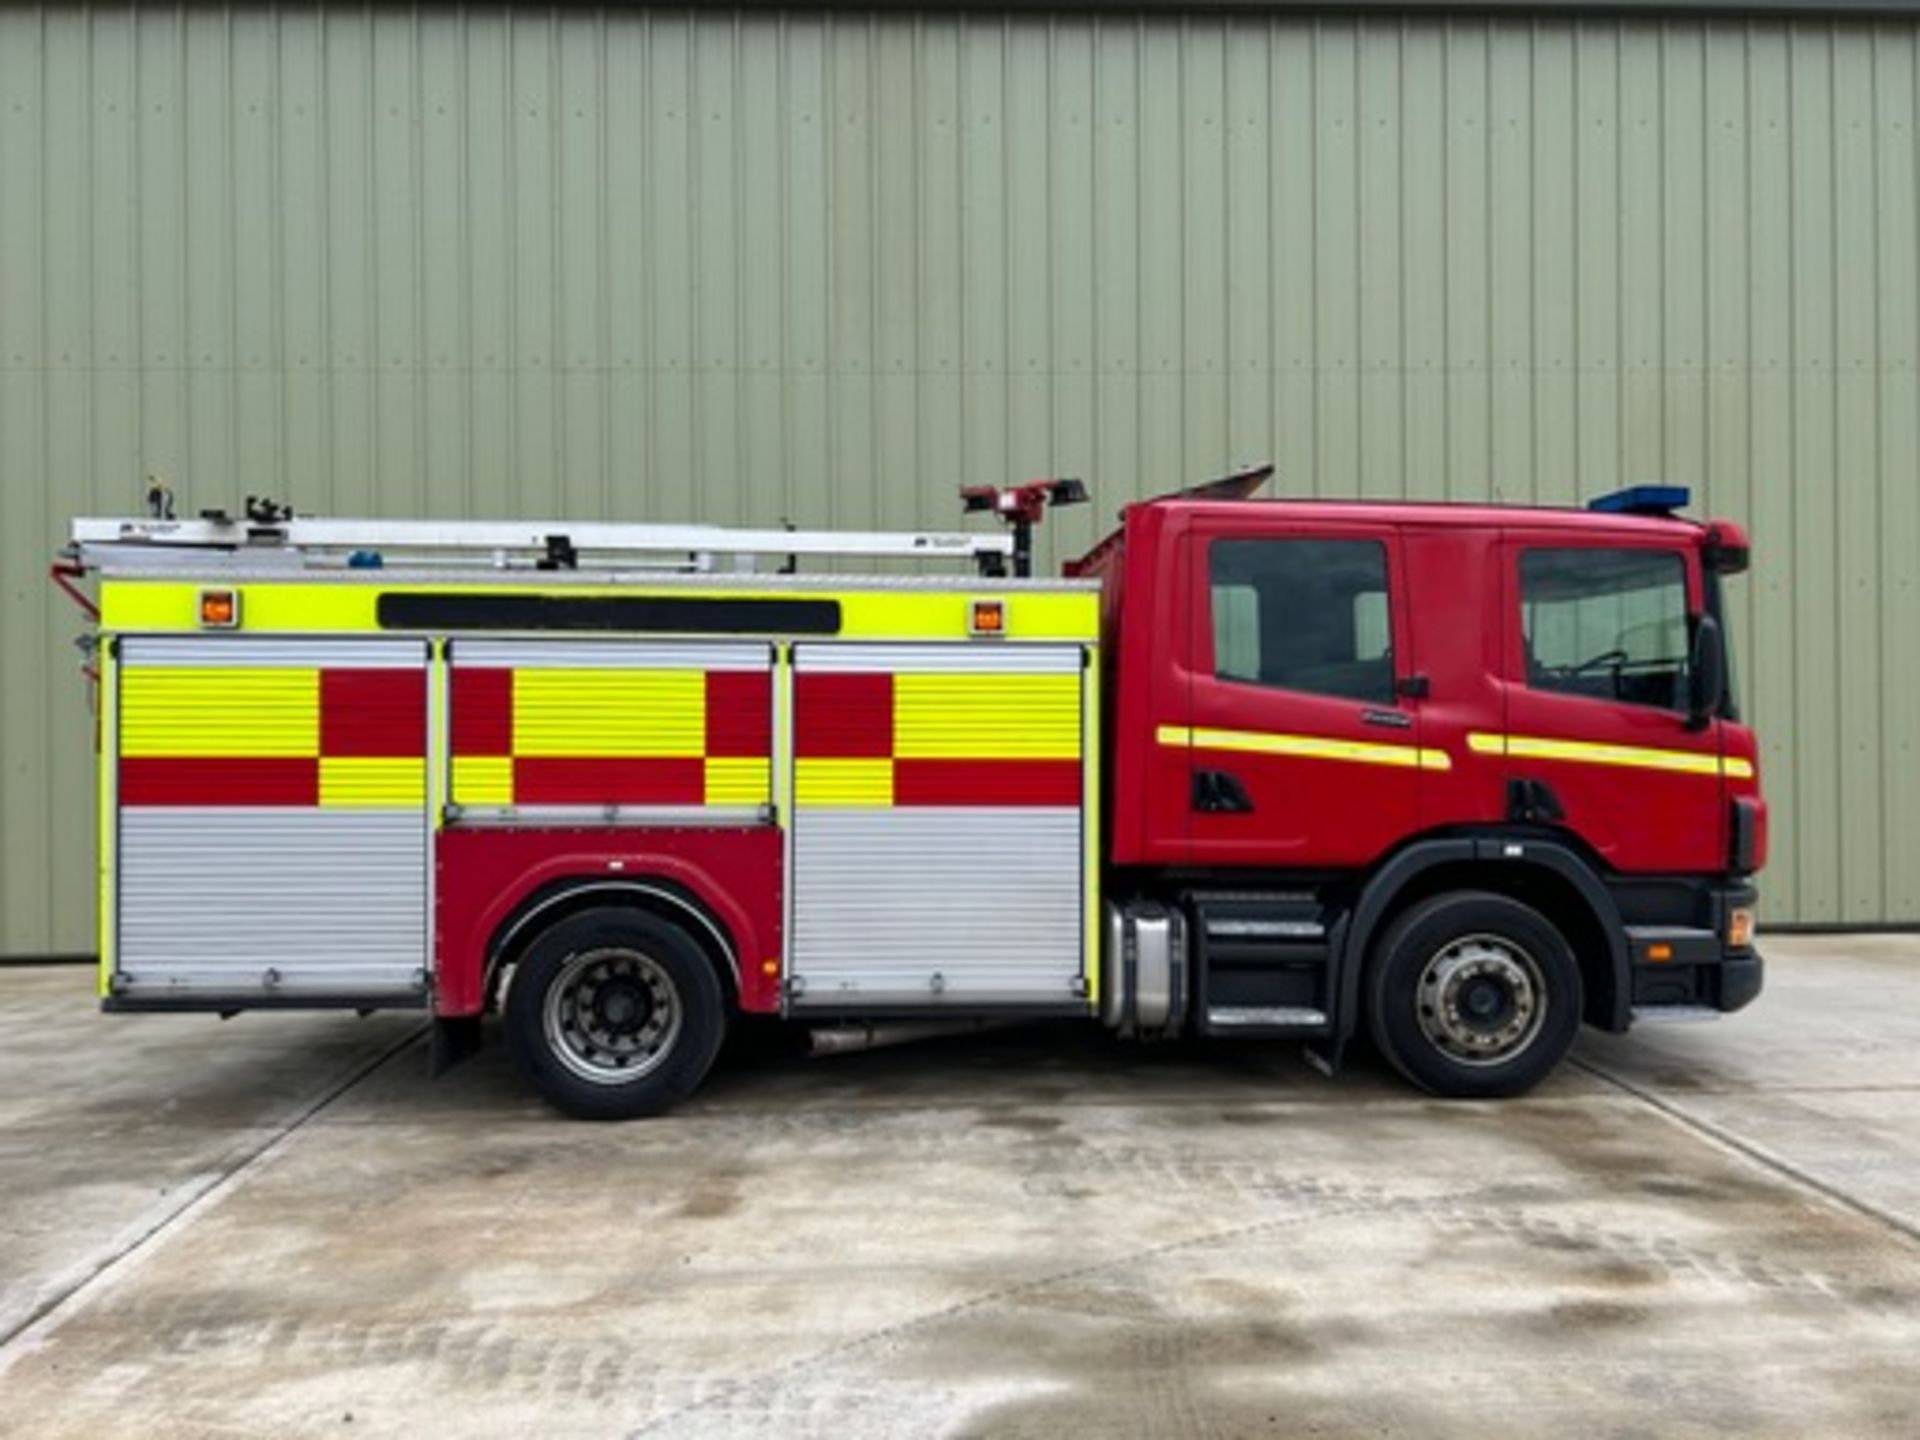 Scania Excalibur 94D 260 Fire Appliance - Image 9 of 26